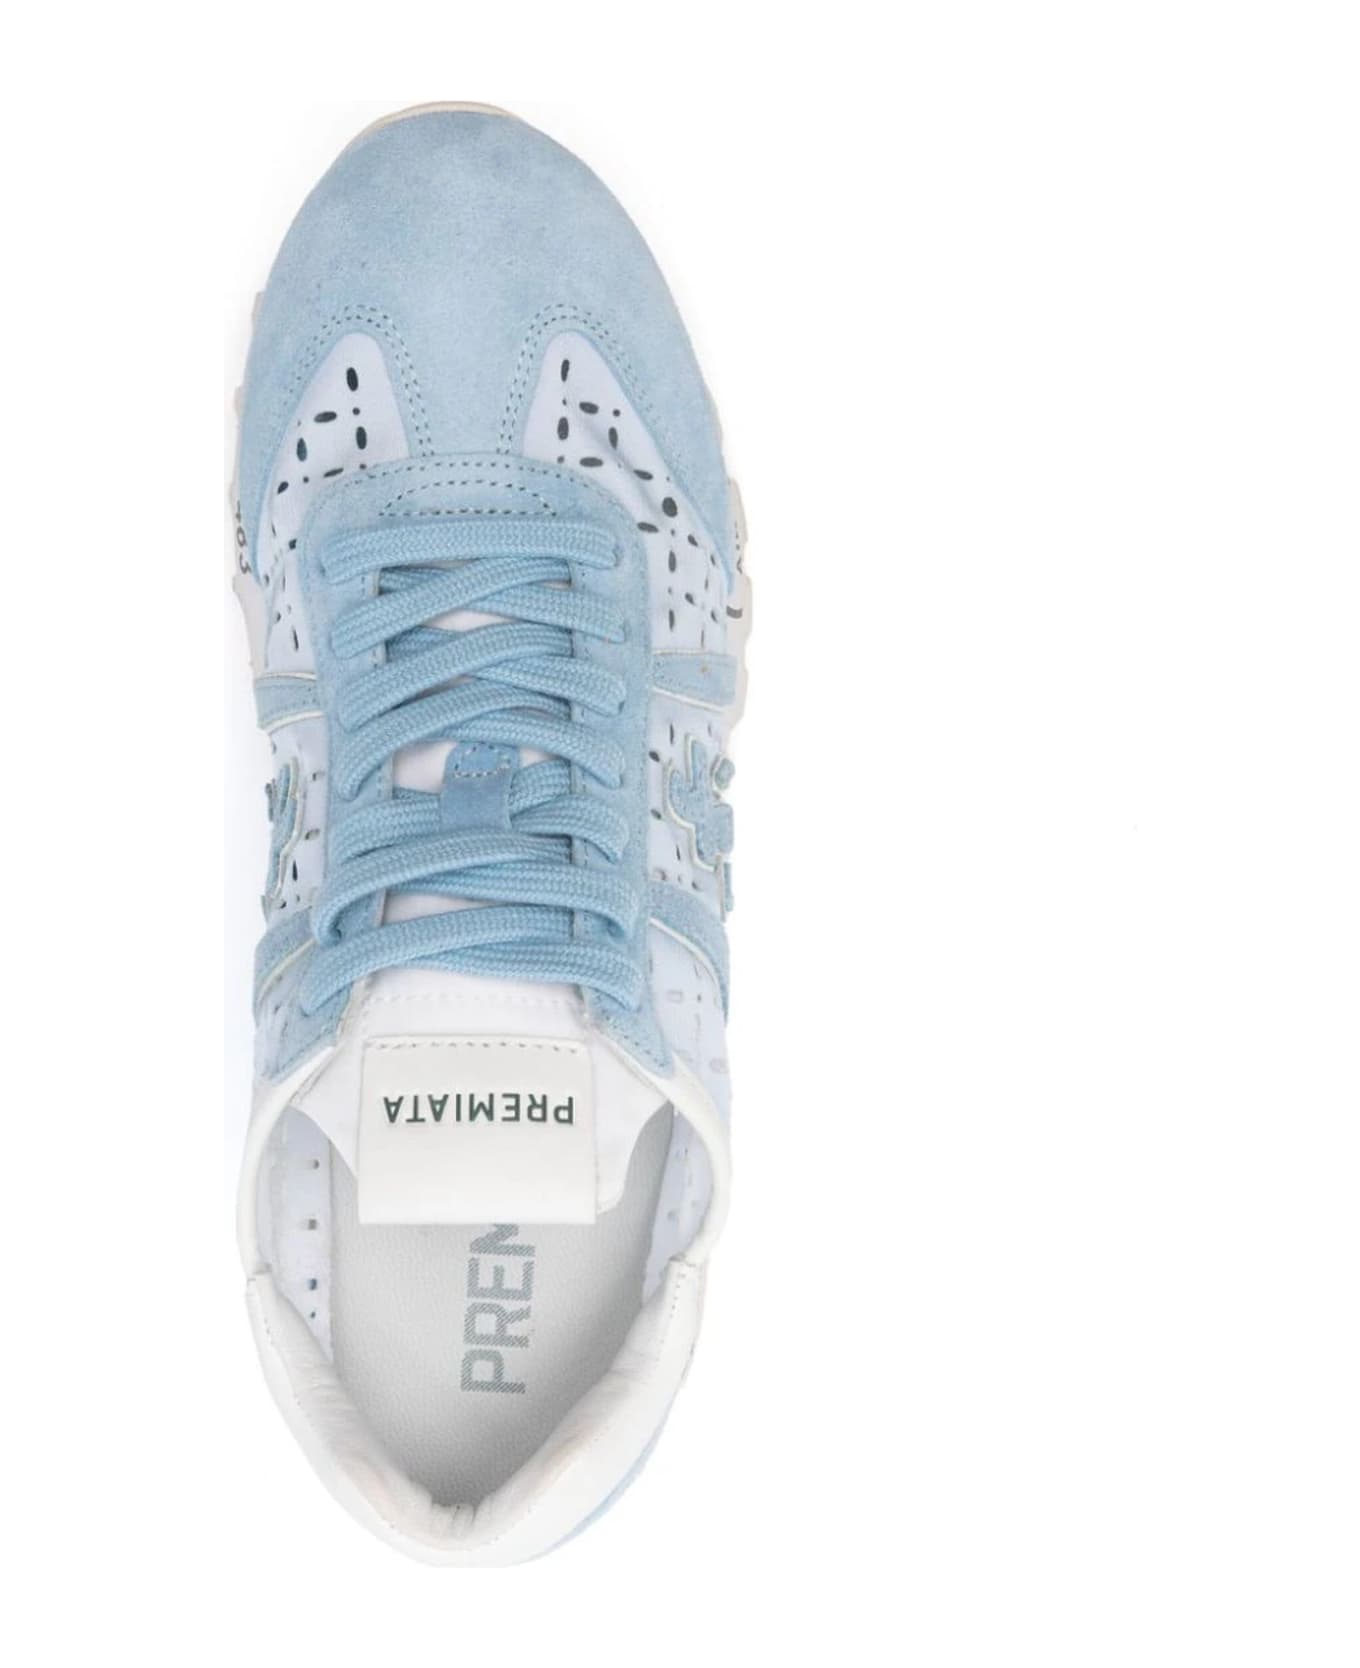 Premiata Light Blue Nylon And Suede Lucy Sneakers - Blue